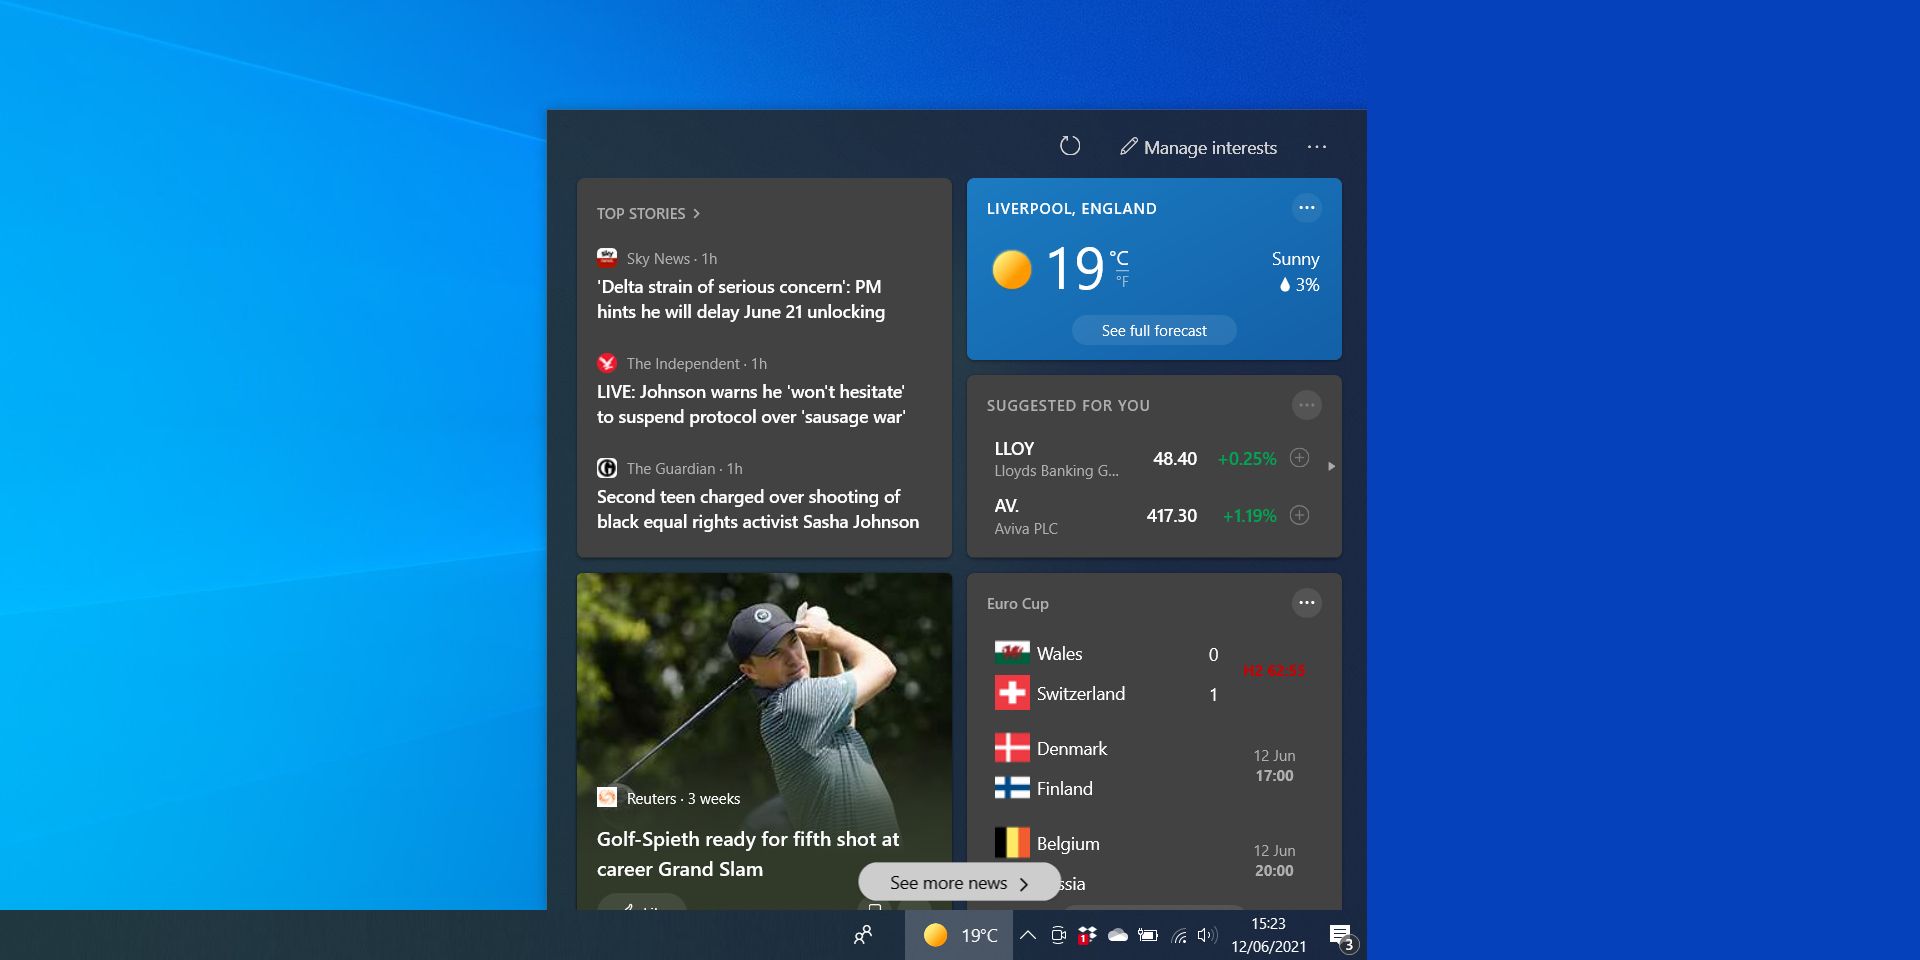 Windows 10 news and interests feature